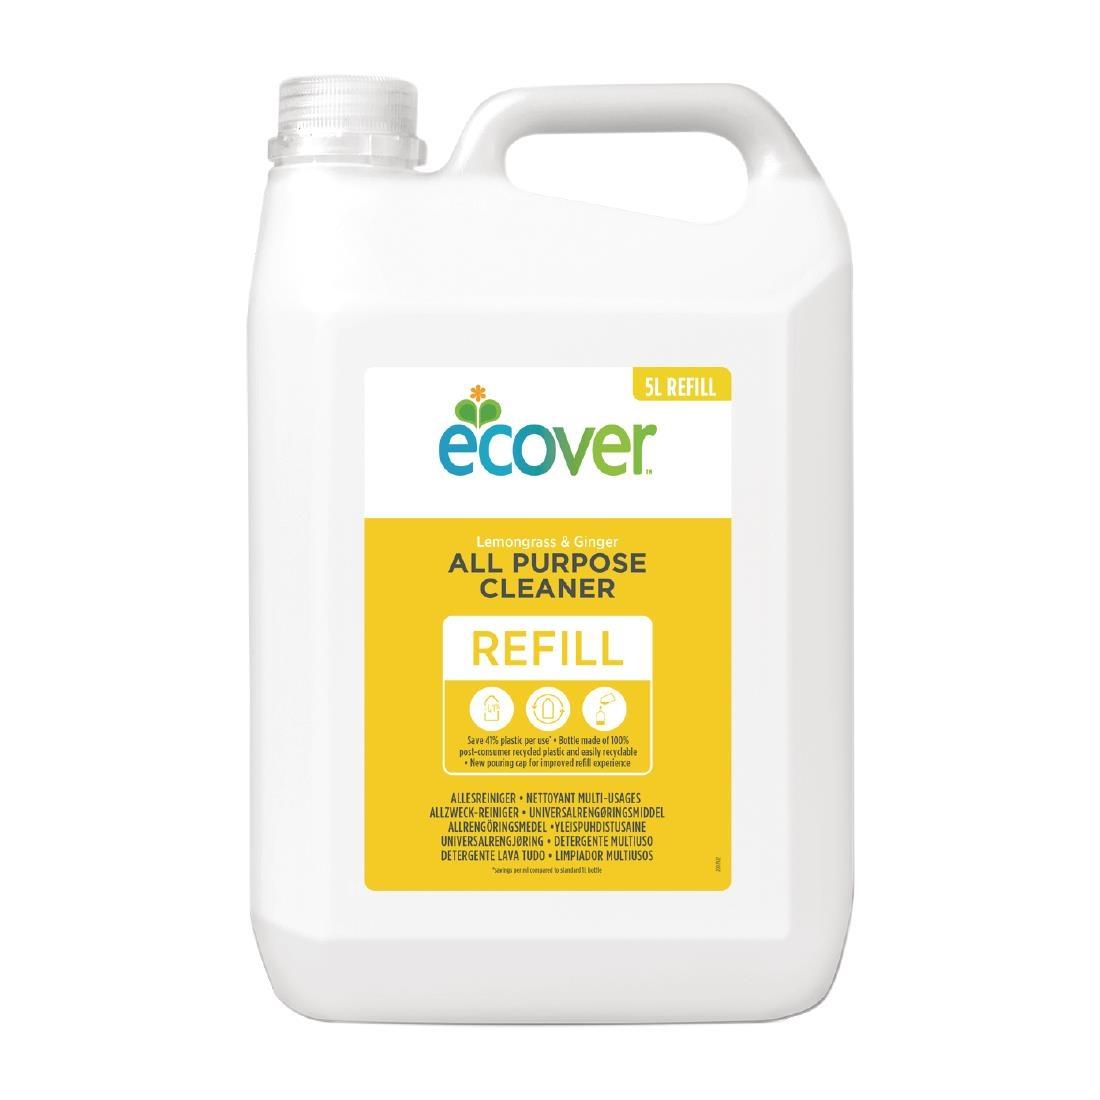 CX190 - 4002129 - Ecover Lemongrass and Ginger All-Purpose Cleaner